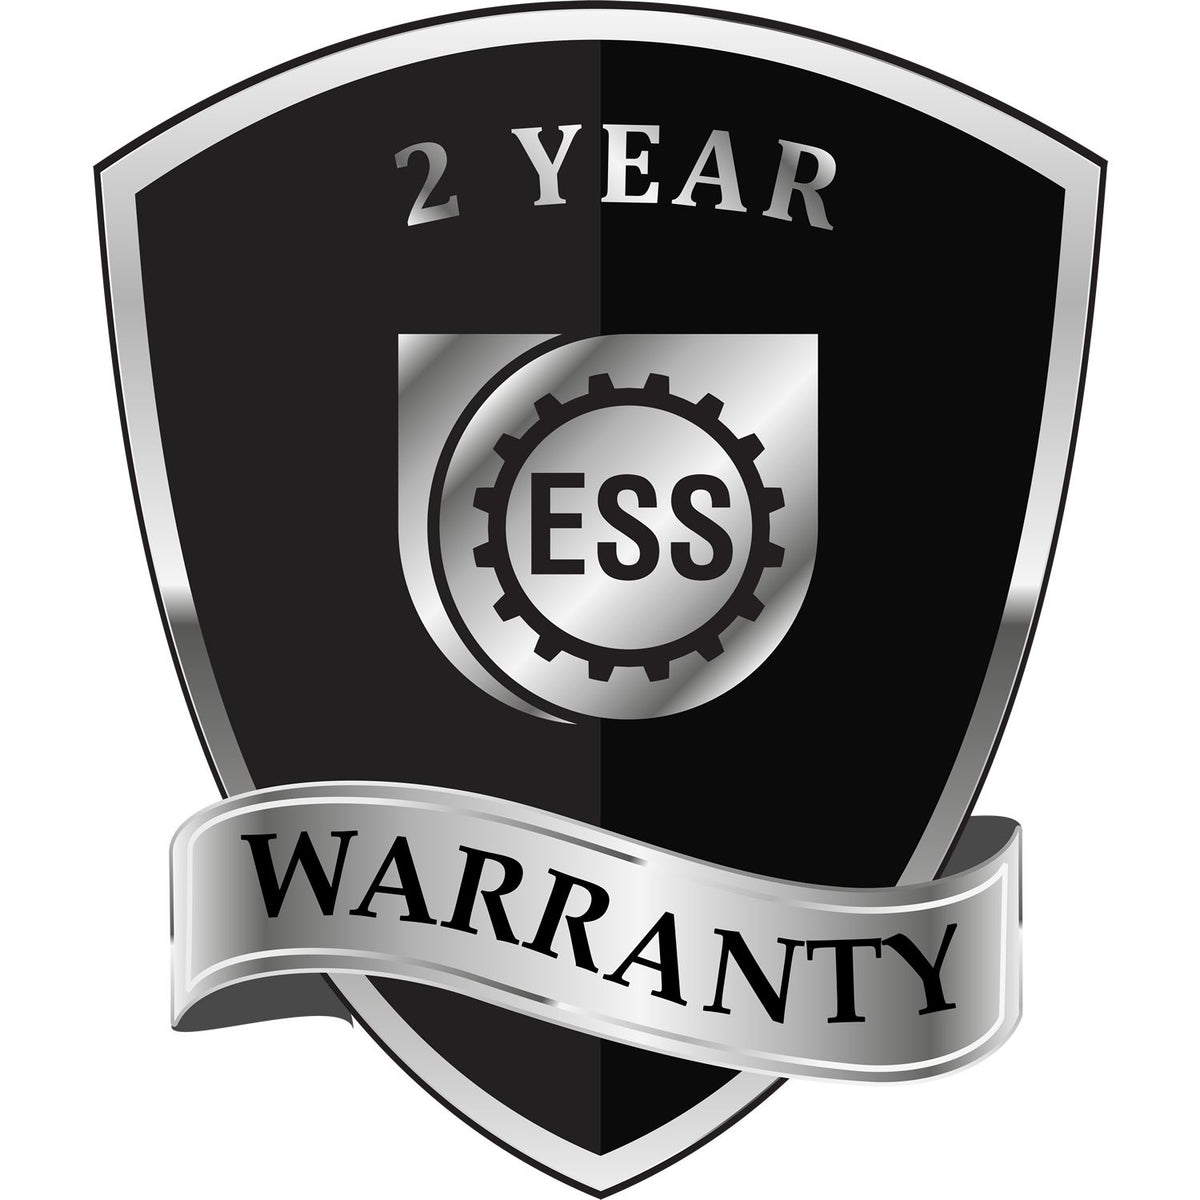 A black and silver badge or emblem showing warranty information for the Gift Connecticut Geologist Seal